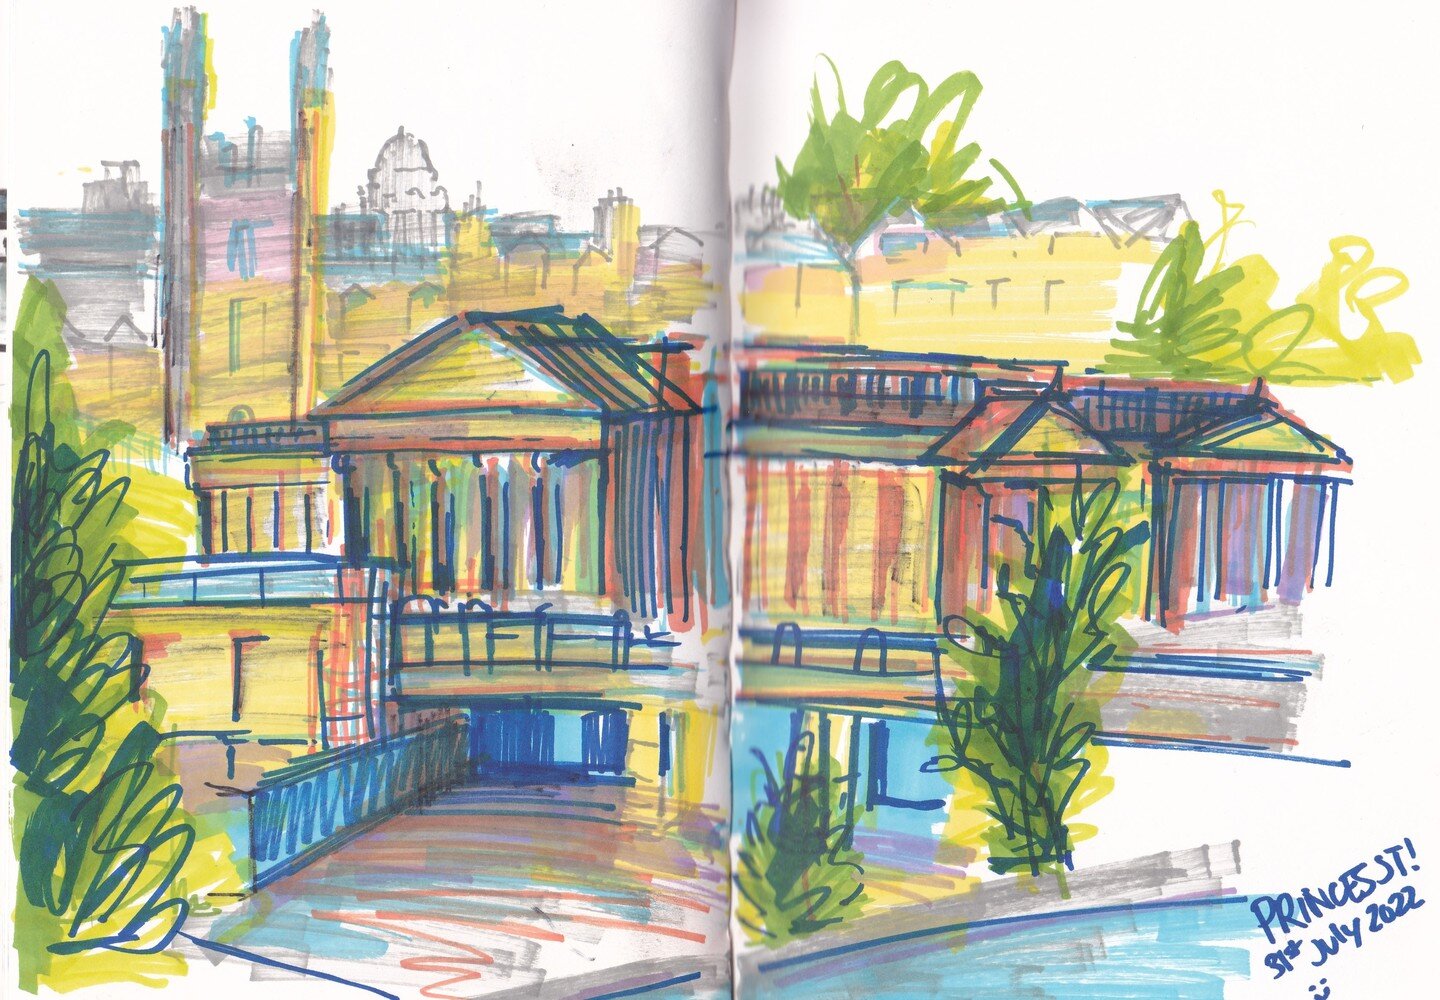 Some more experimental sketches recently from heading out with the Edinburgh #urbansketchers ! Had a blast using the markers and working on feeling less anxious about putting down the wrong lines on the page. Still a work in progress but loving the v